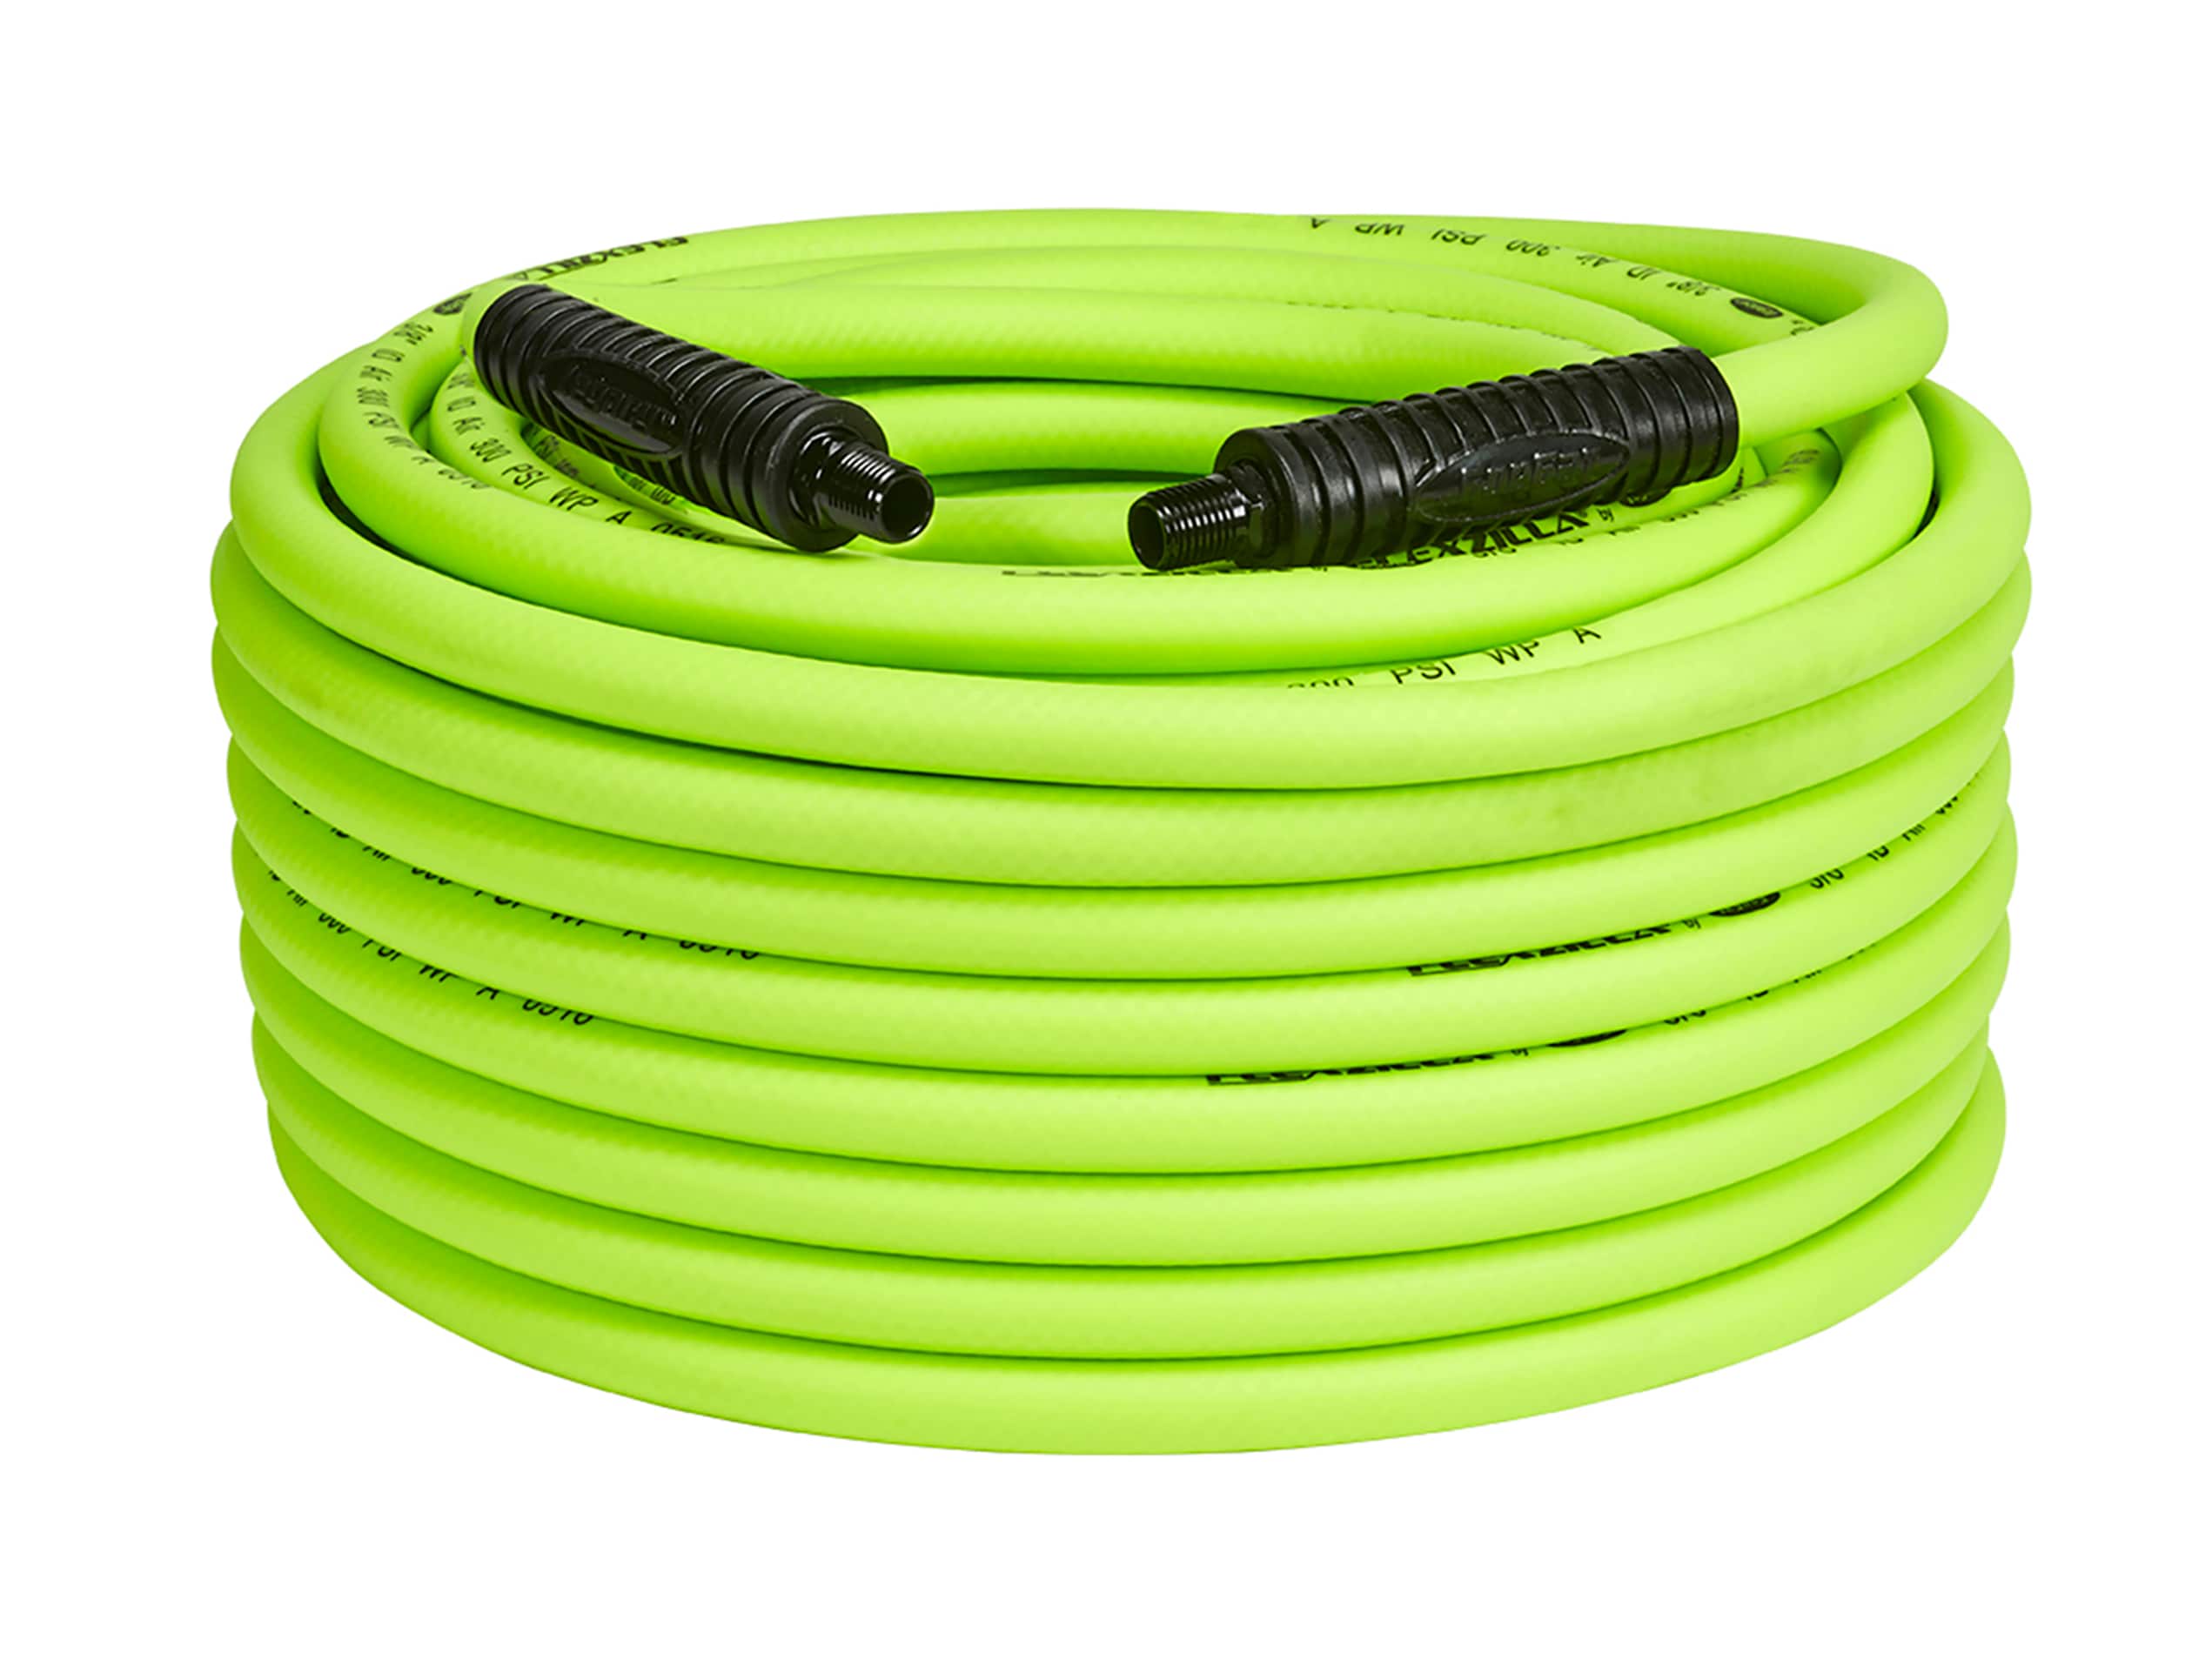 Flexzilla Air Hose, 3/8-in x 100-ft, 1/4-in Mnpt Fittings in the